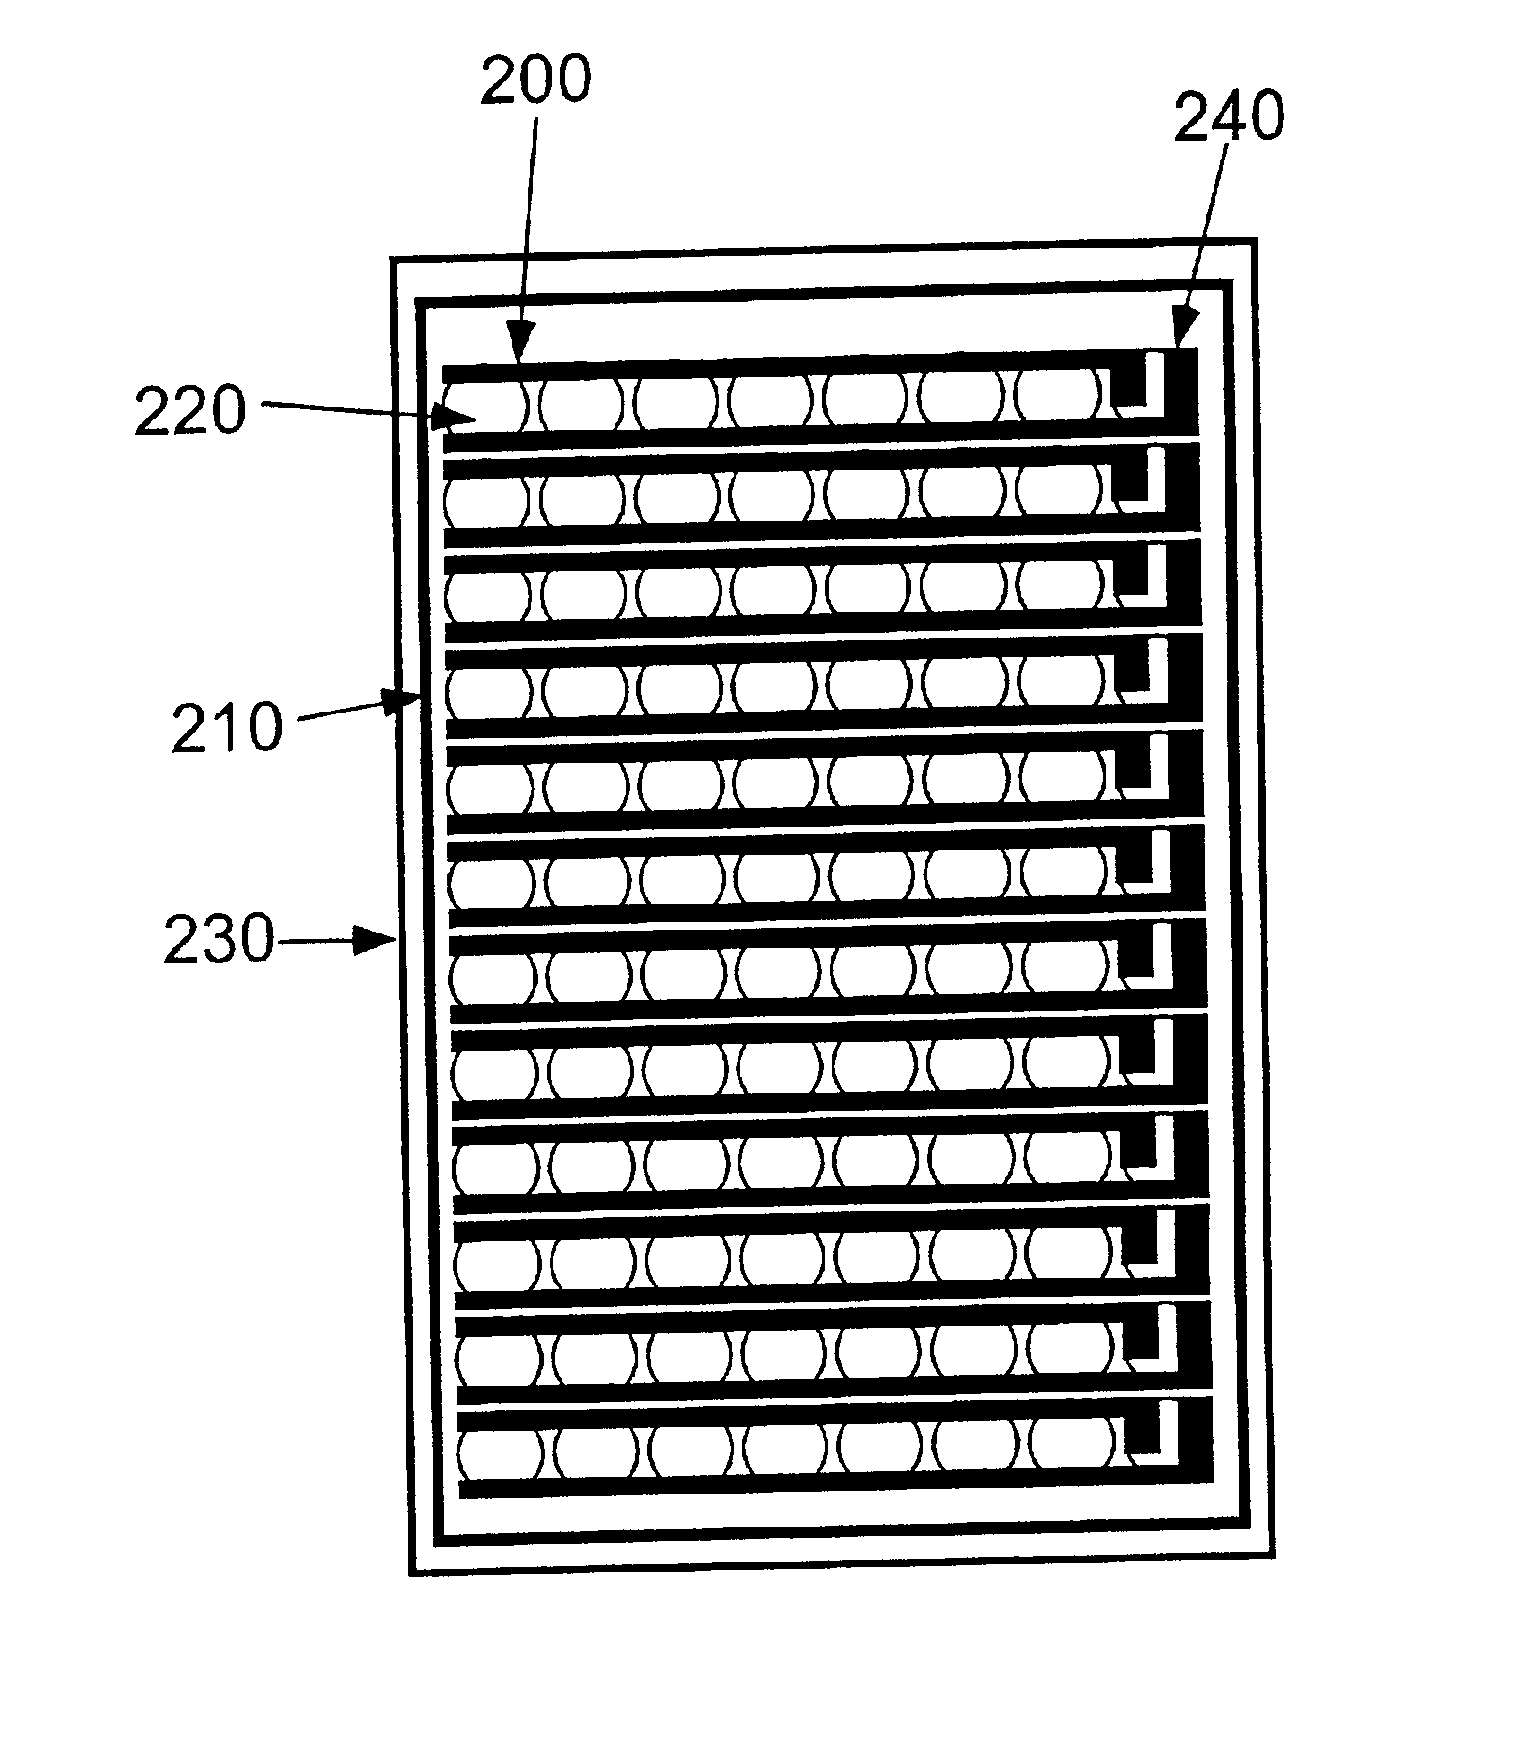 Multi-well plate and electrode assemblies for ion channel assays